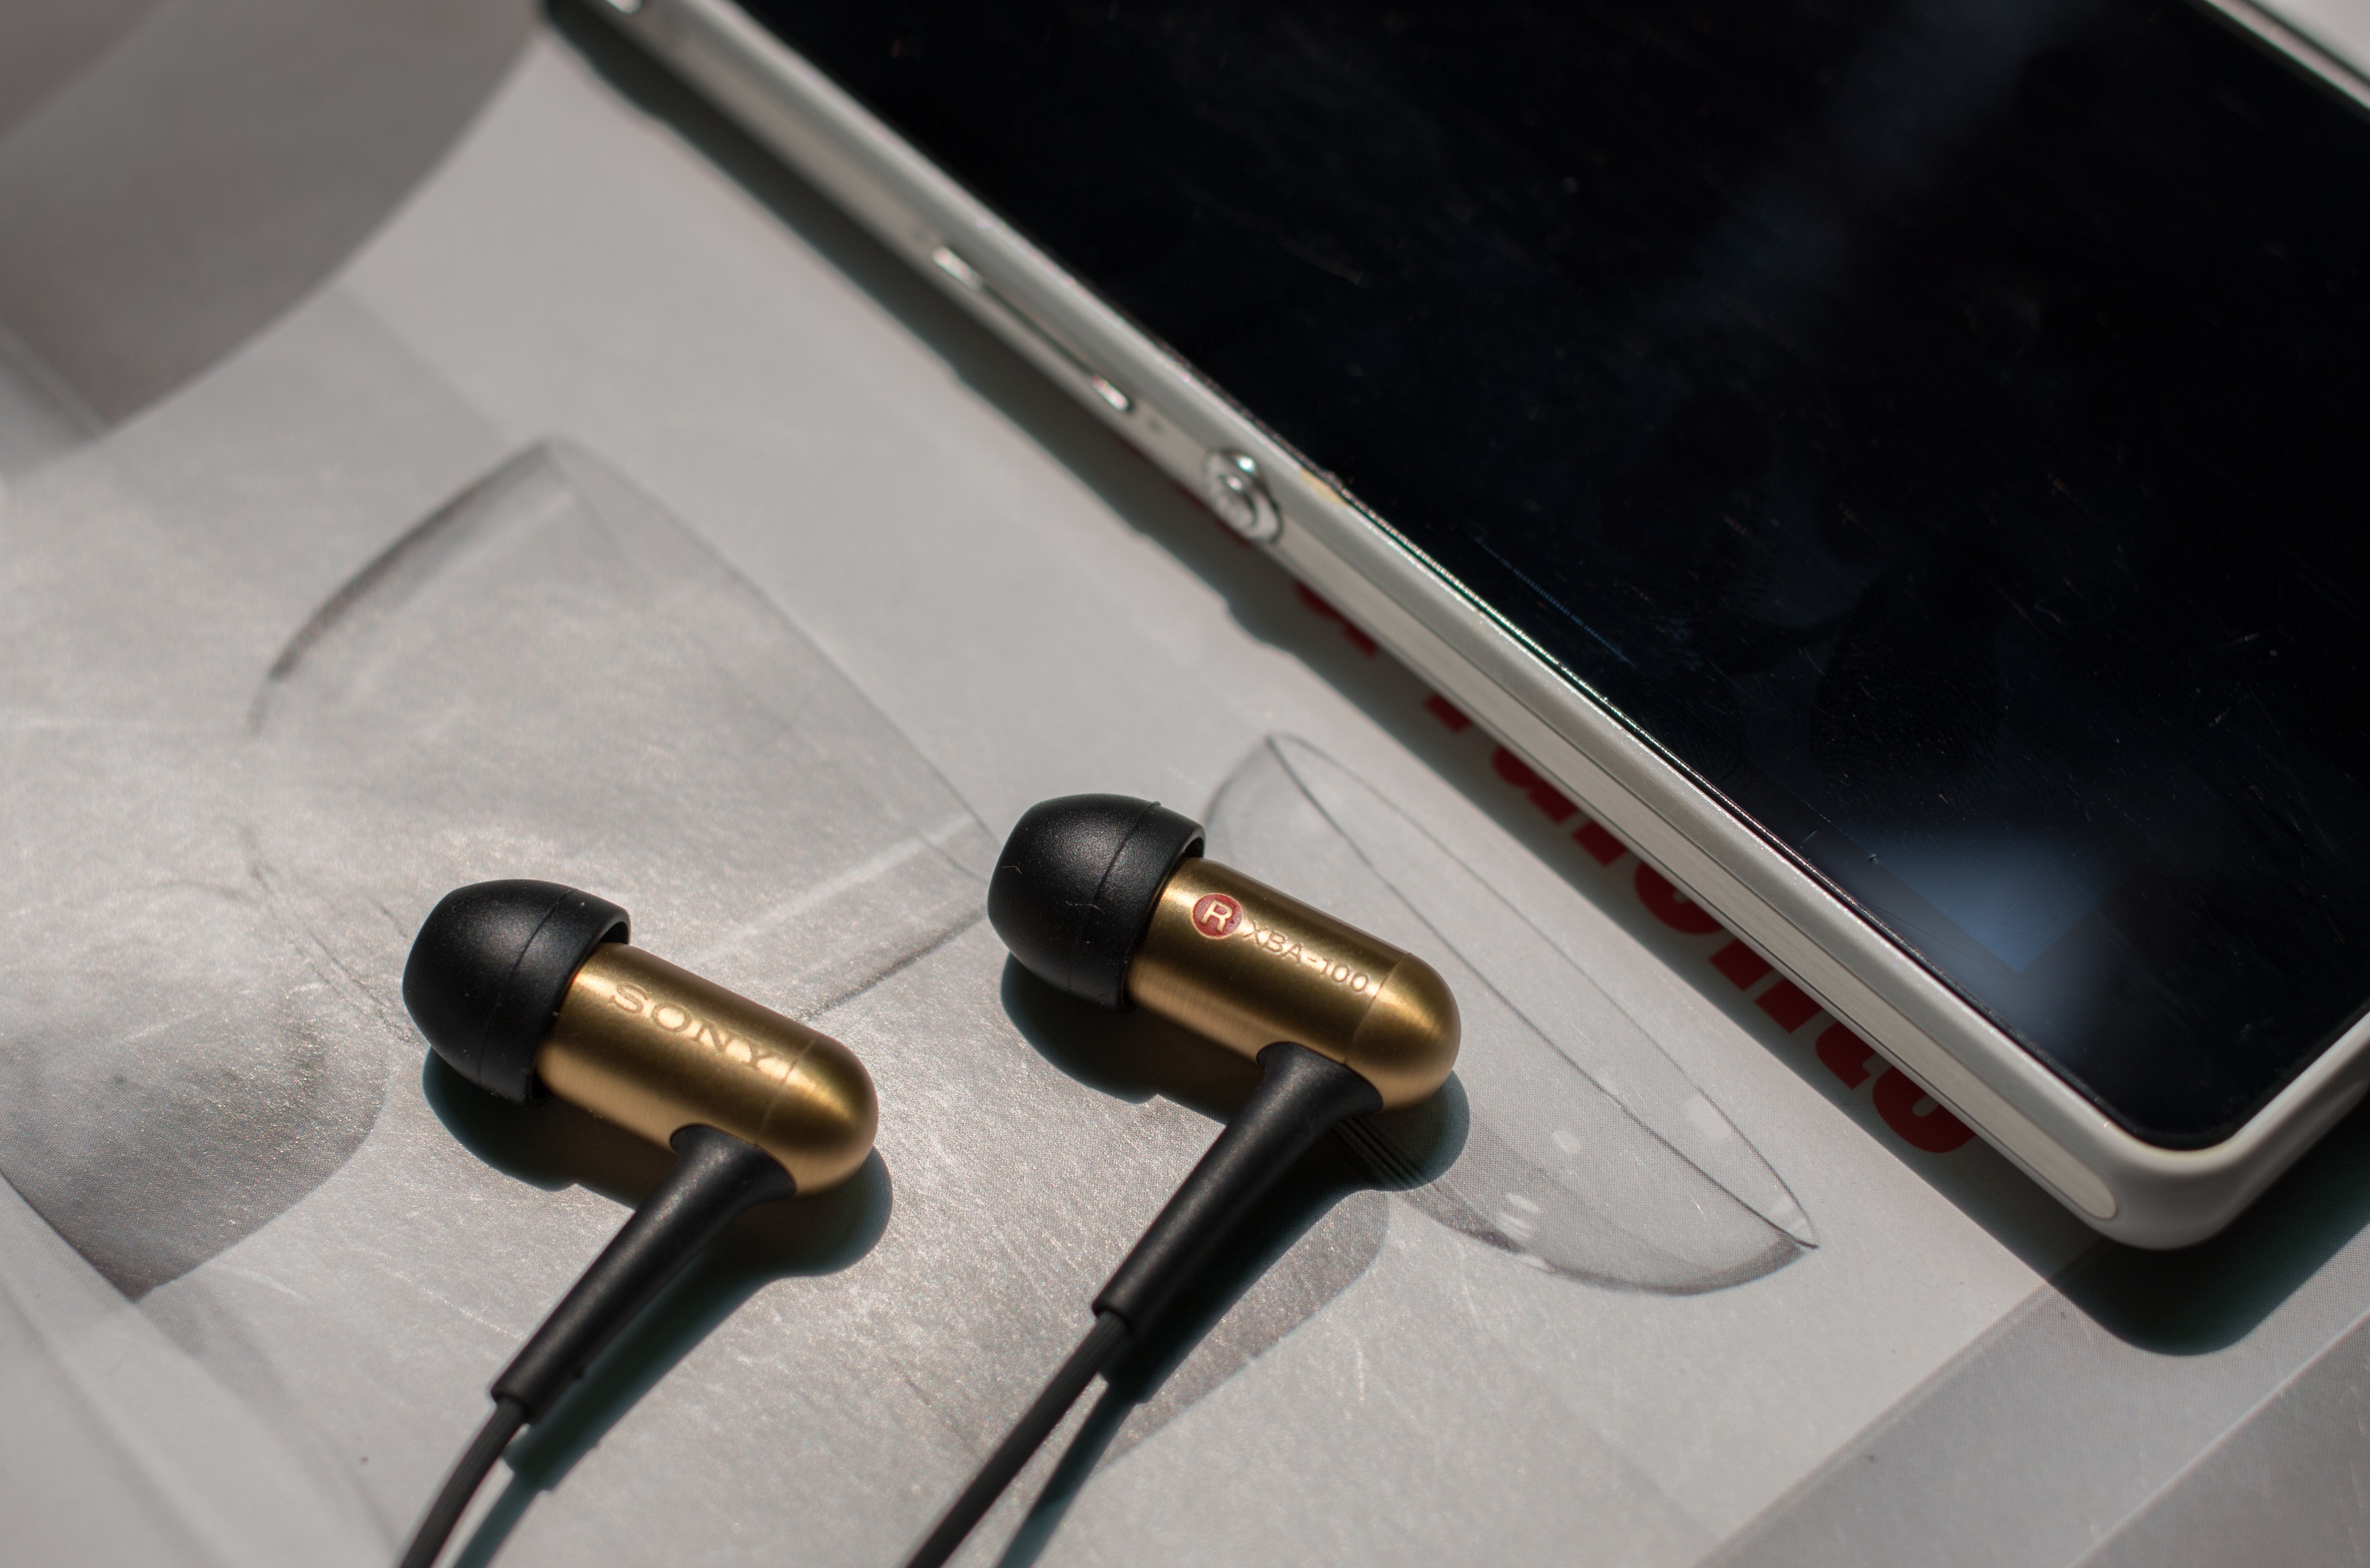 brown and black sony earbuds